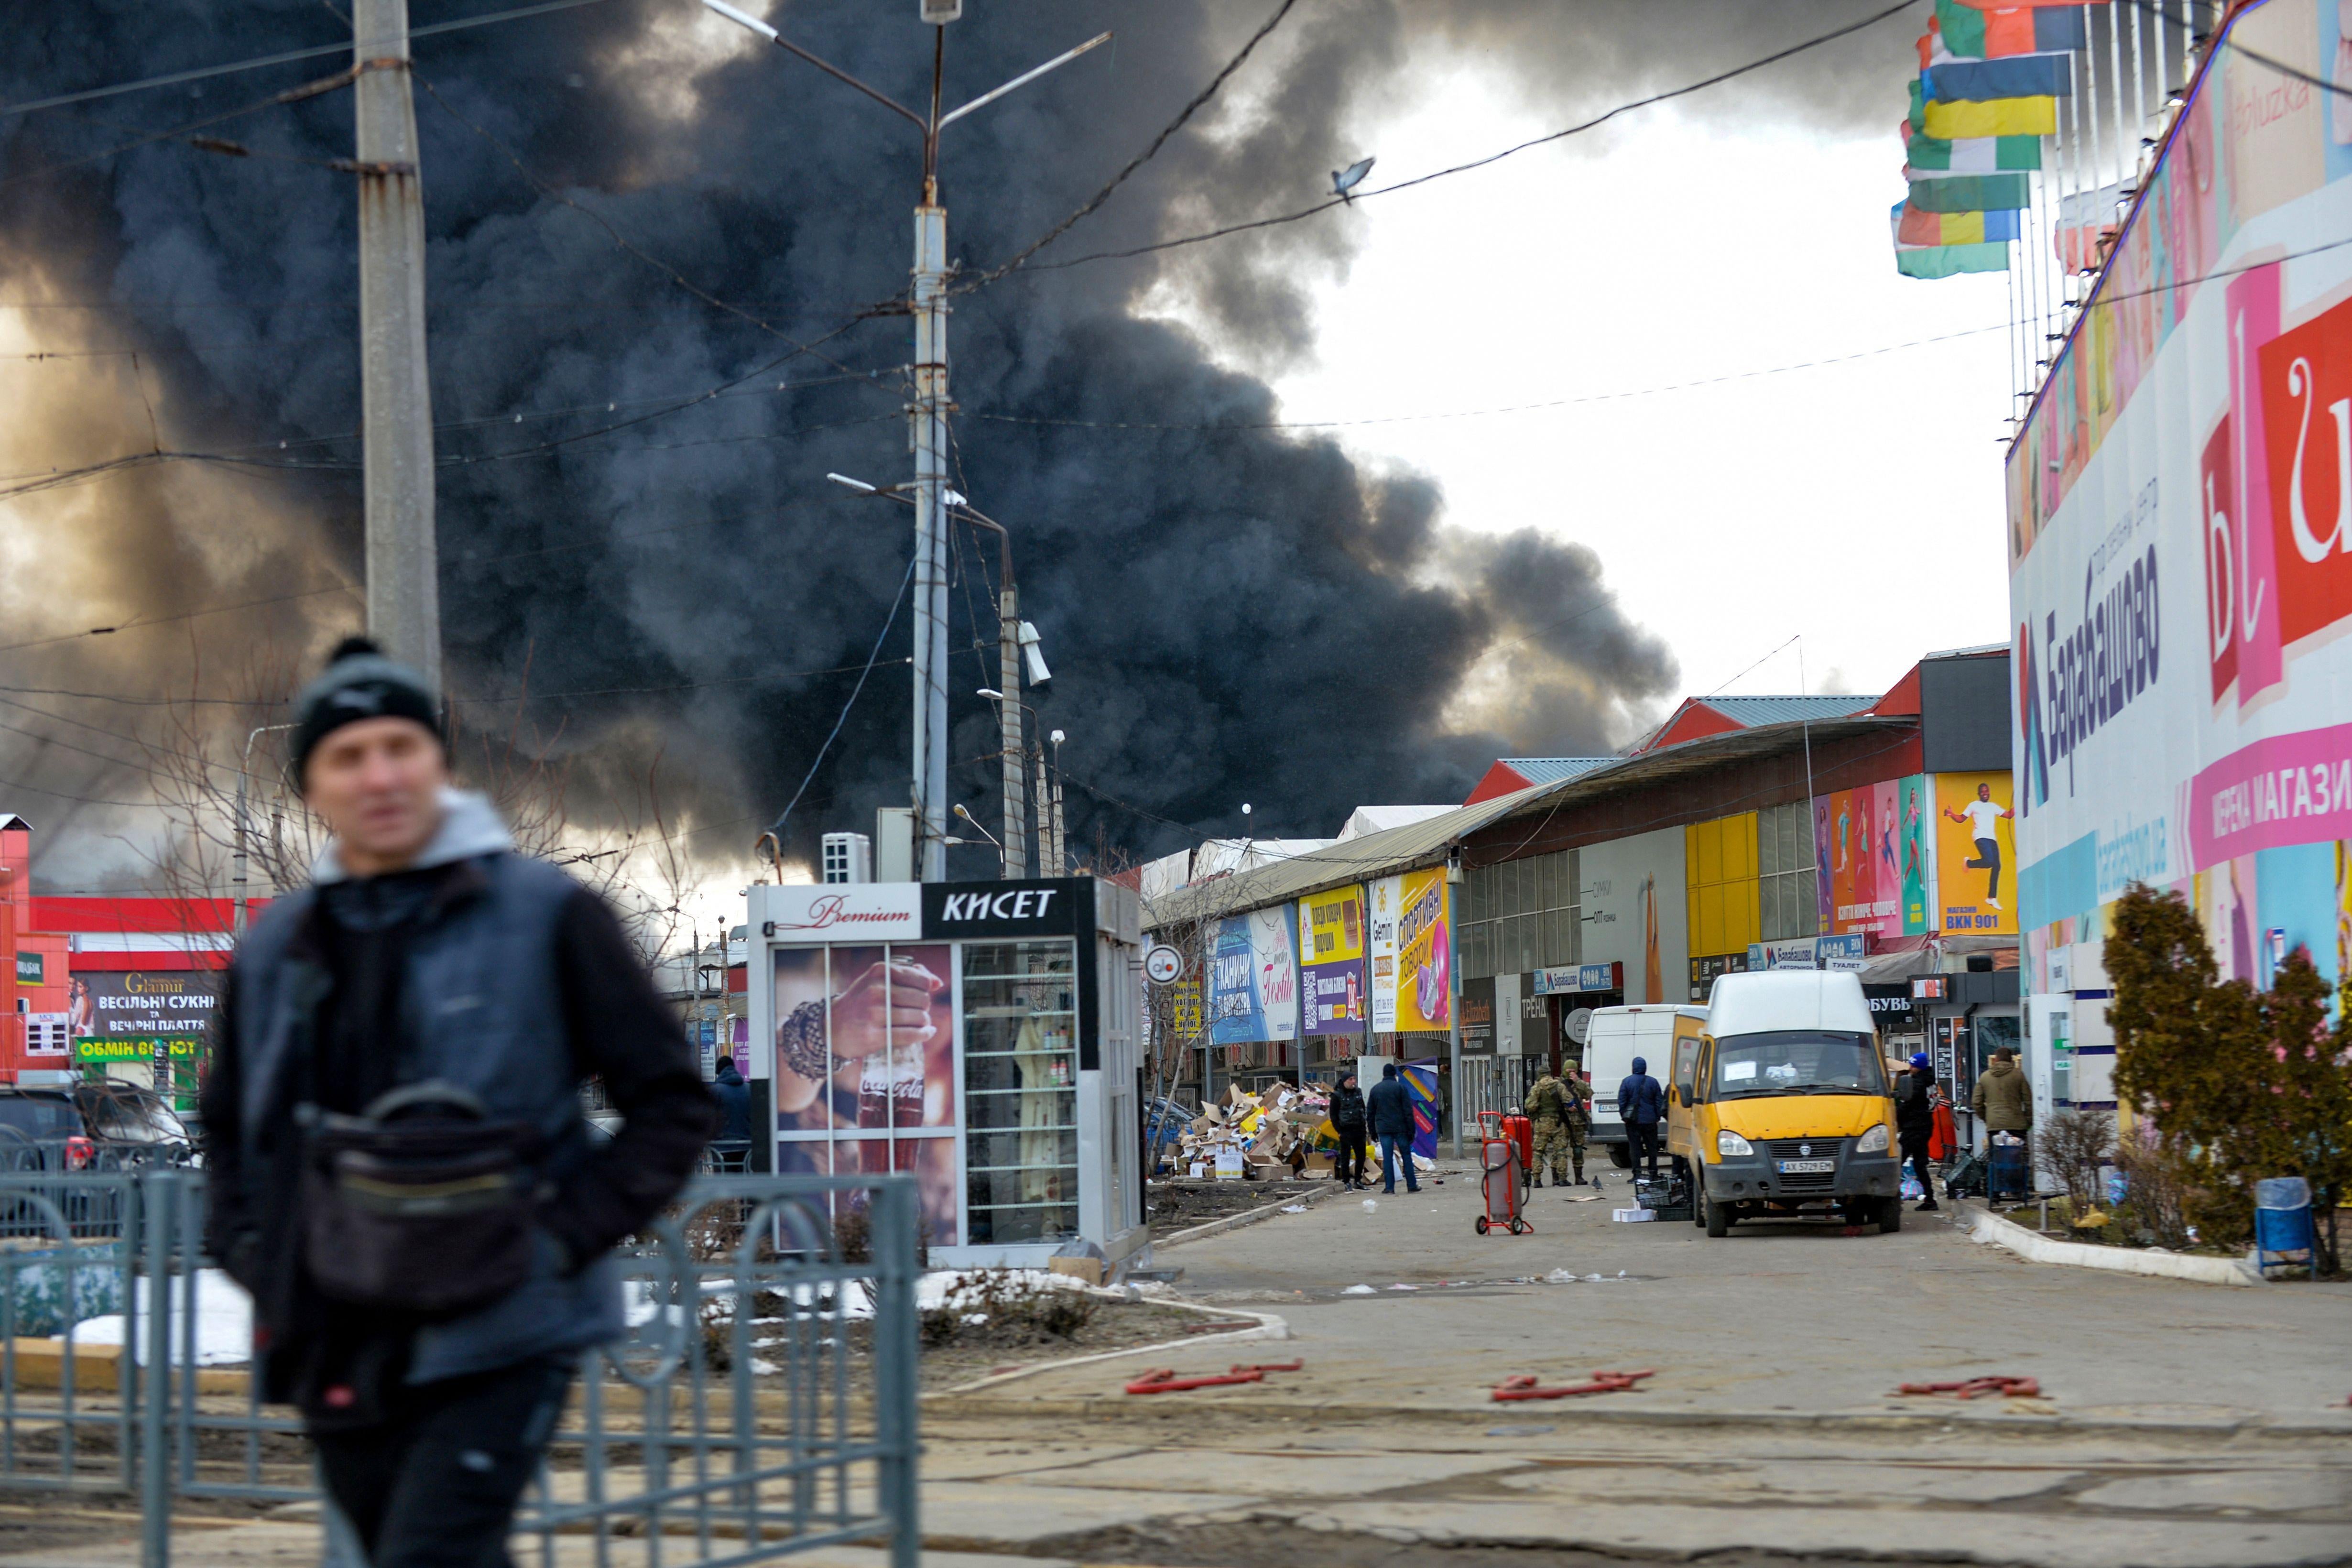 Black smoke rises into the sky above a market after a bombing